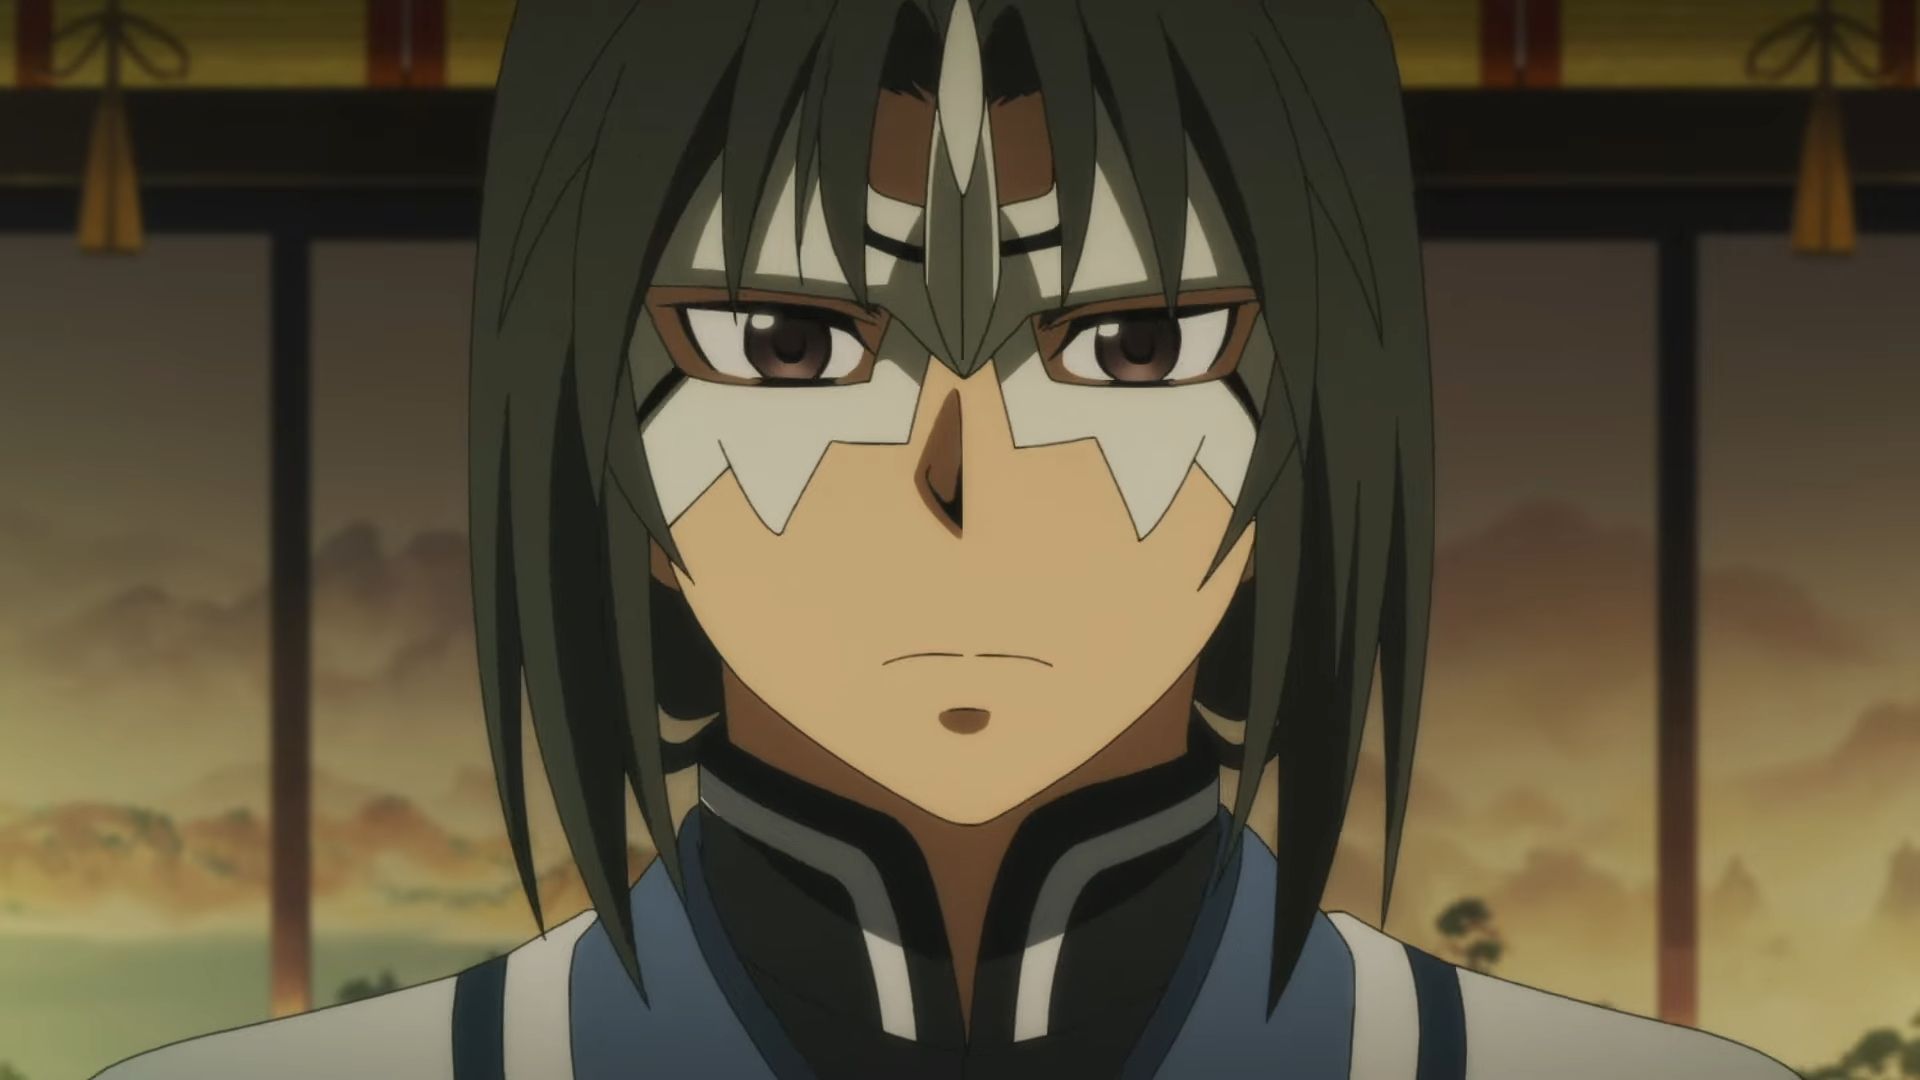 Utawarerumono: Mask of Truth Anime Video Released With New Information